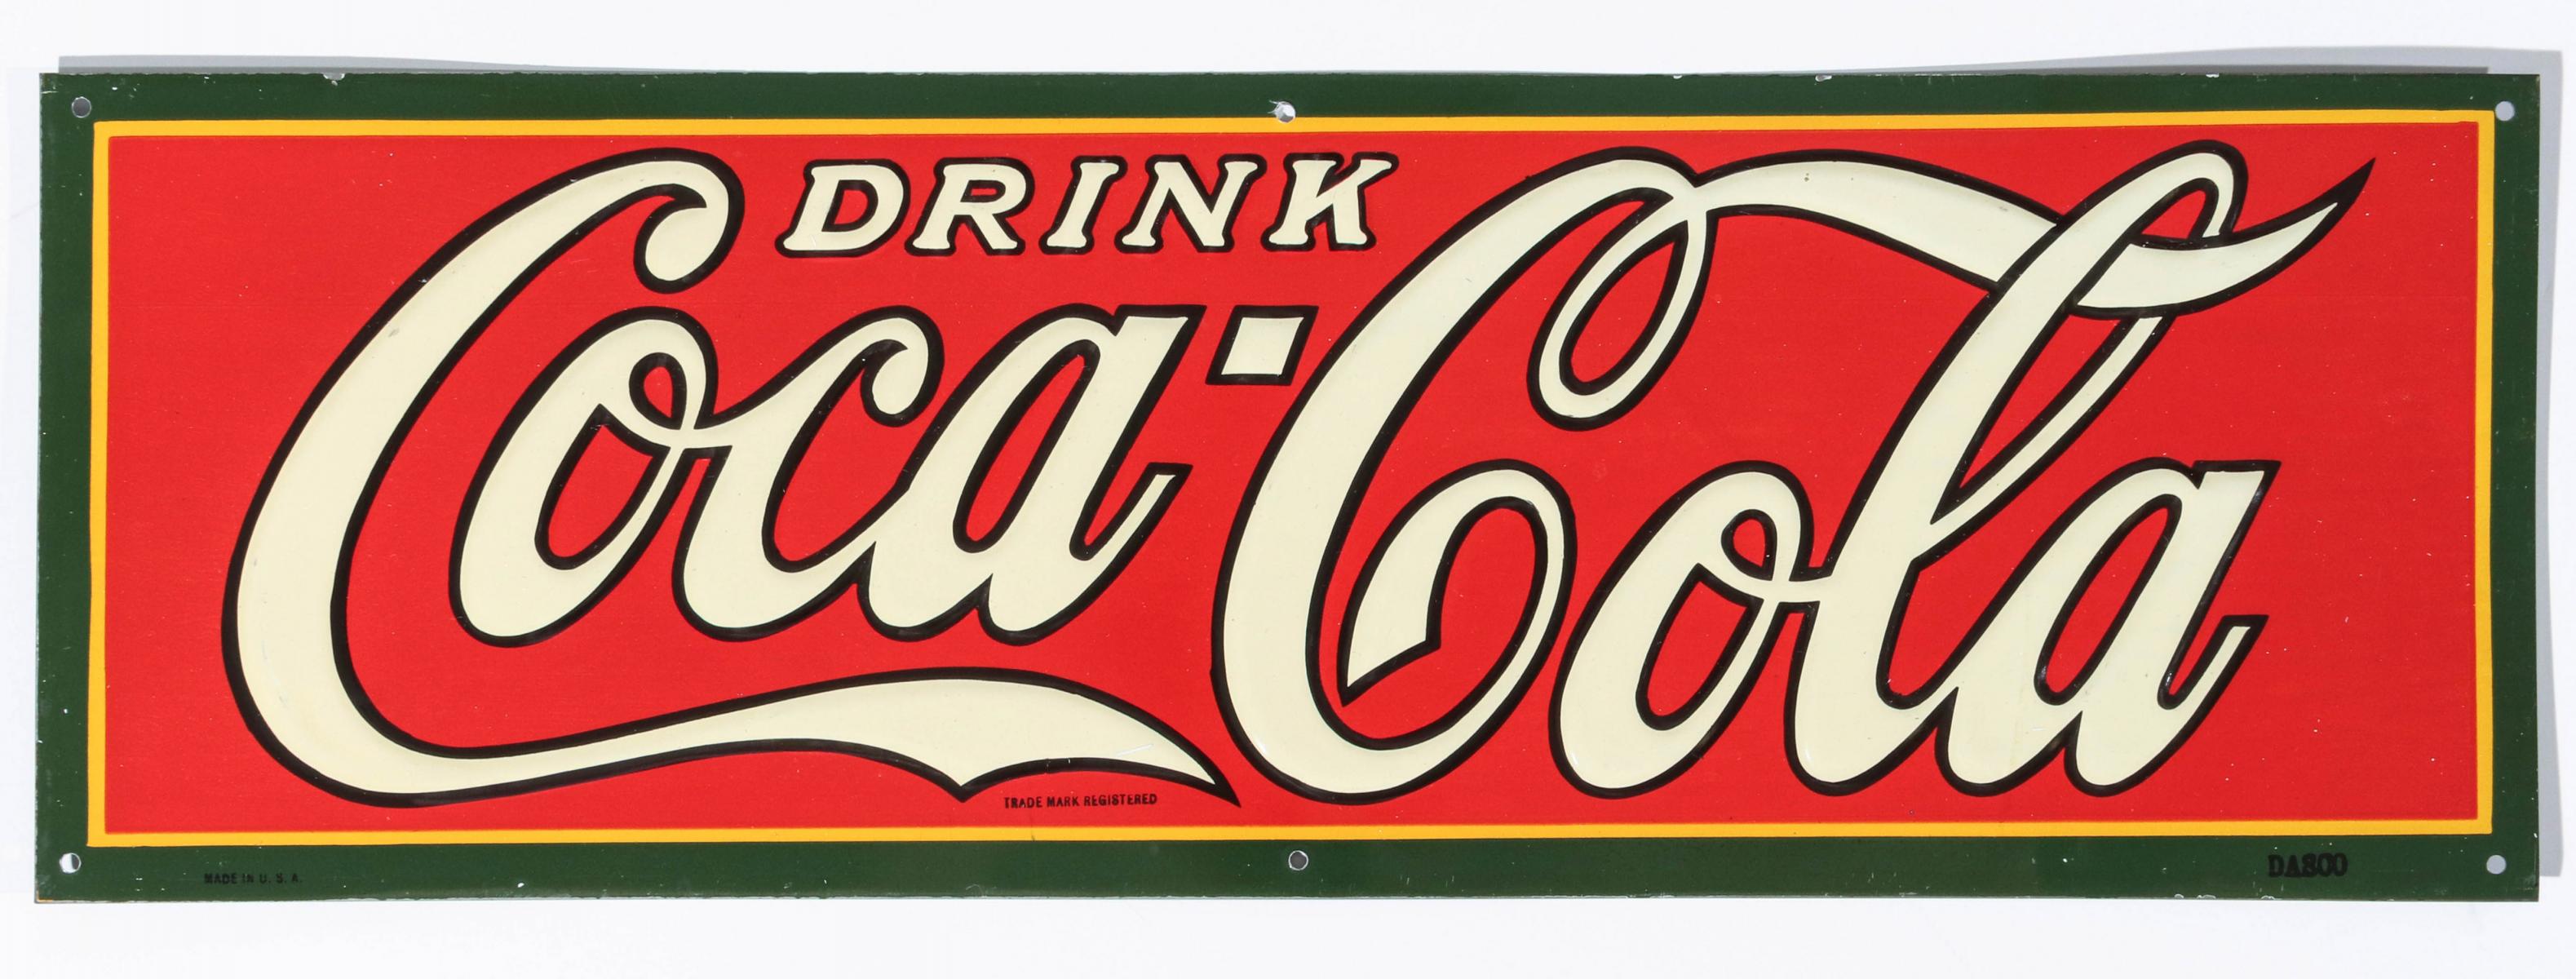 AN EMBOSSED COCA-COLA ADVERTISING SIGN